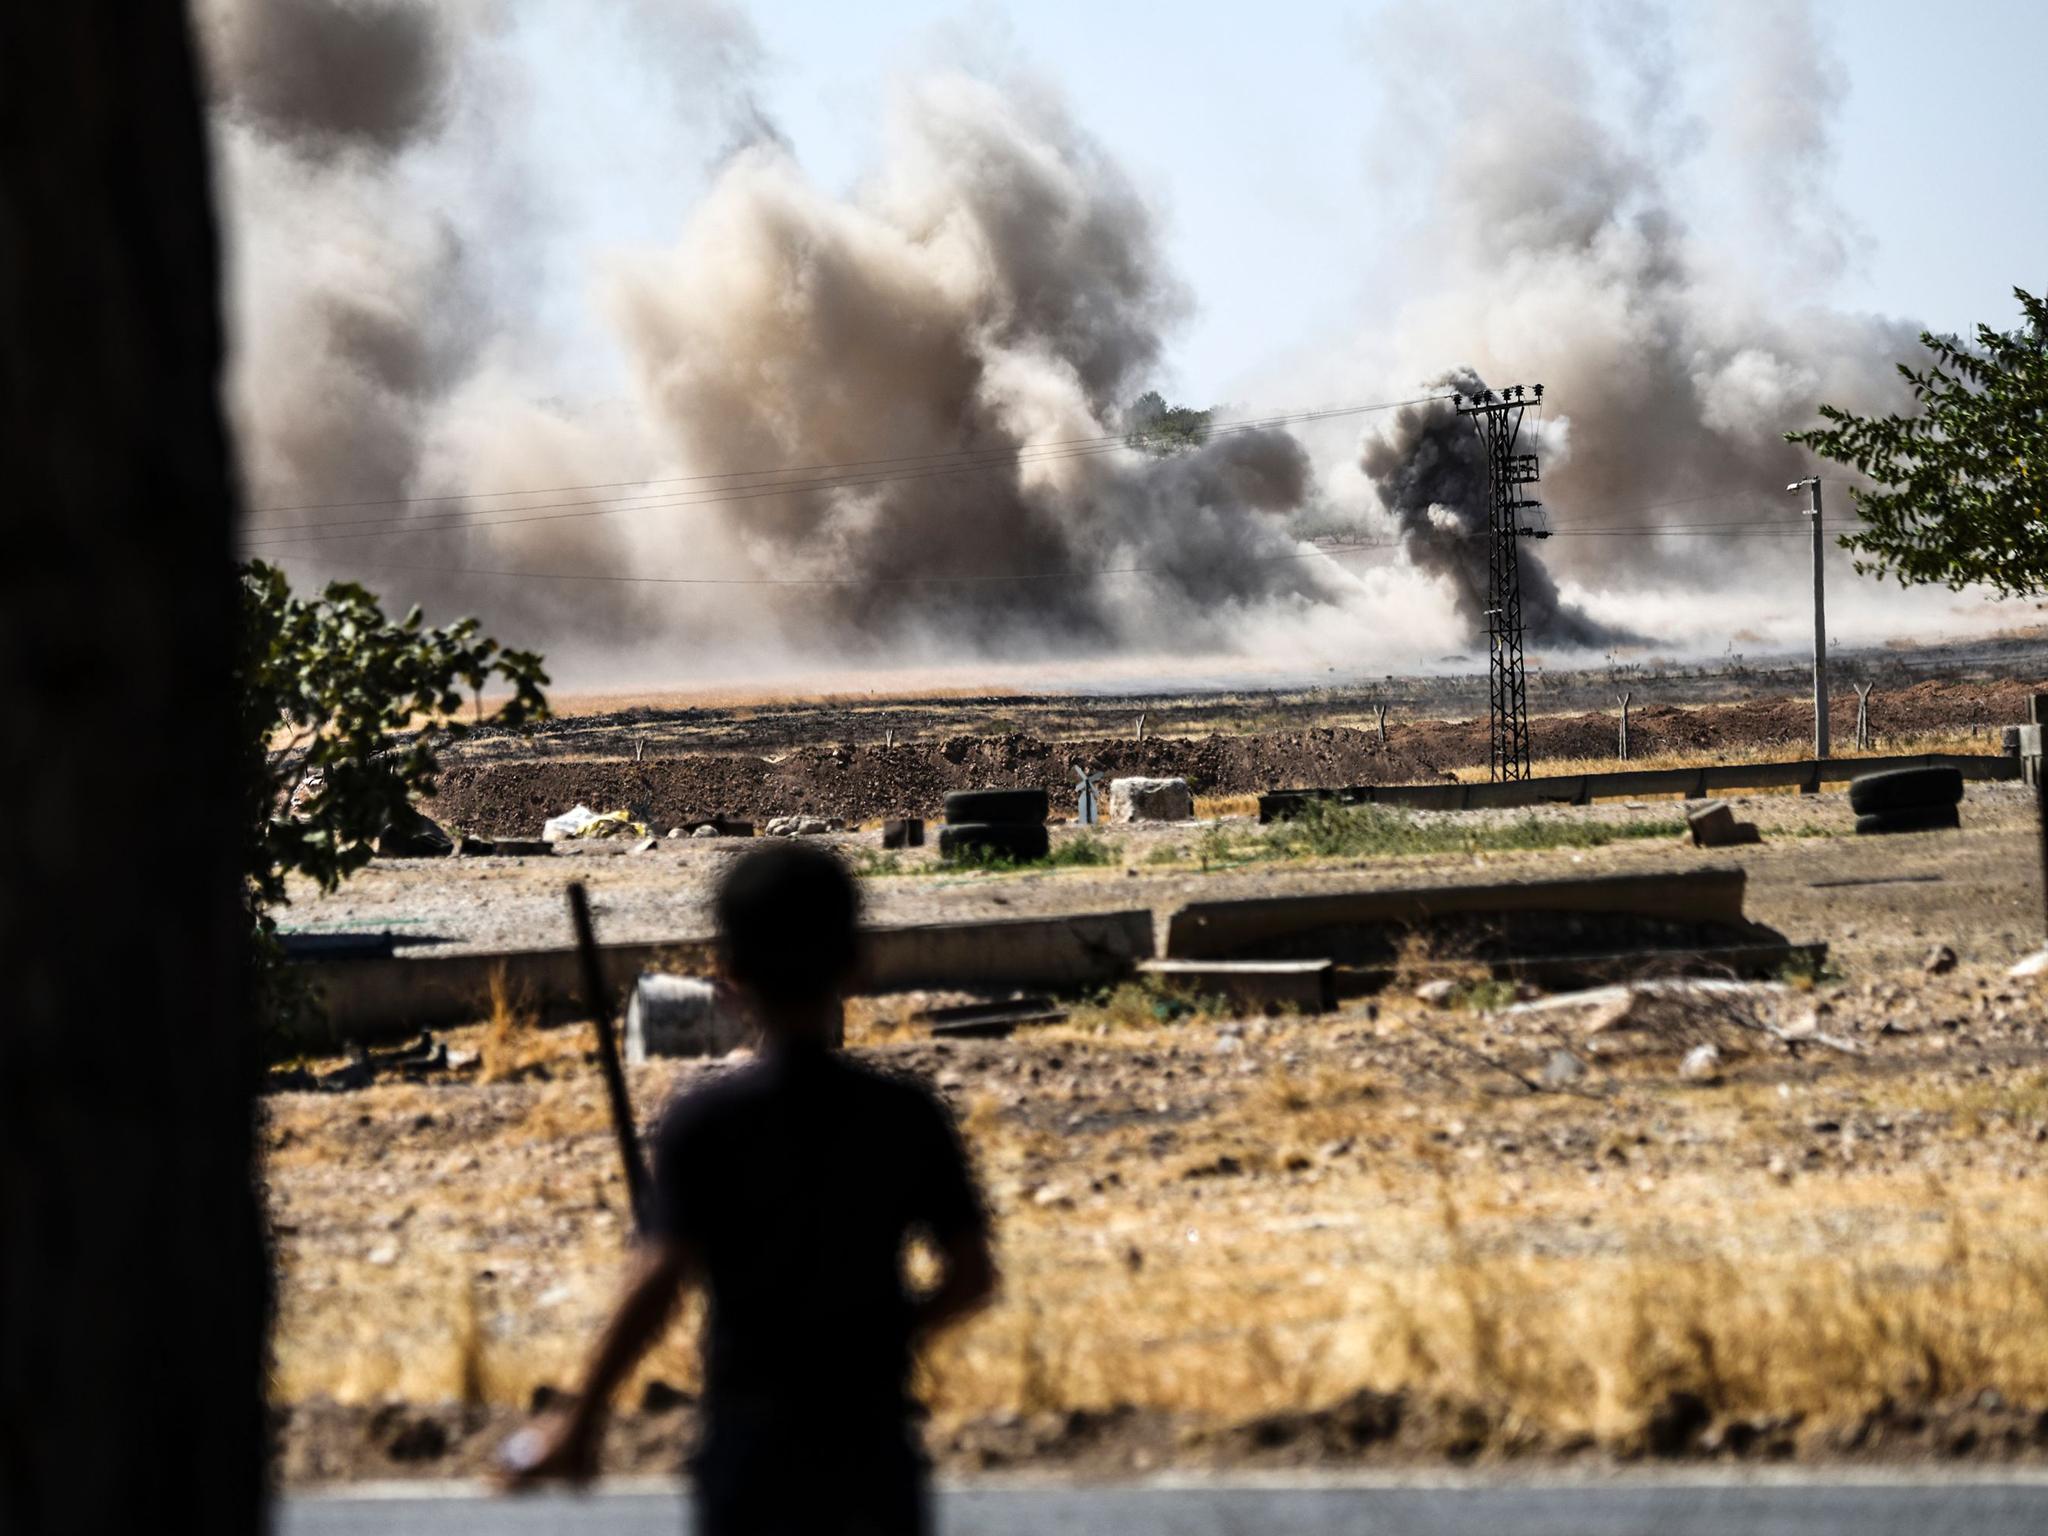 A young boy watches smoke rising over Jarabulus from the Turkish-Syrian border town of Karkamis on 1 September